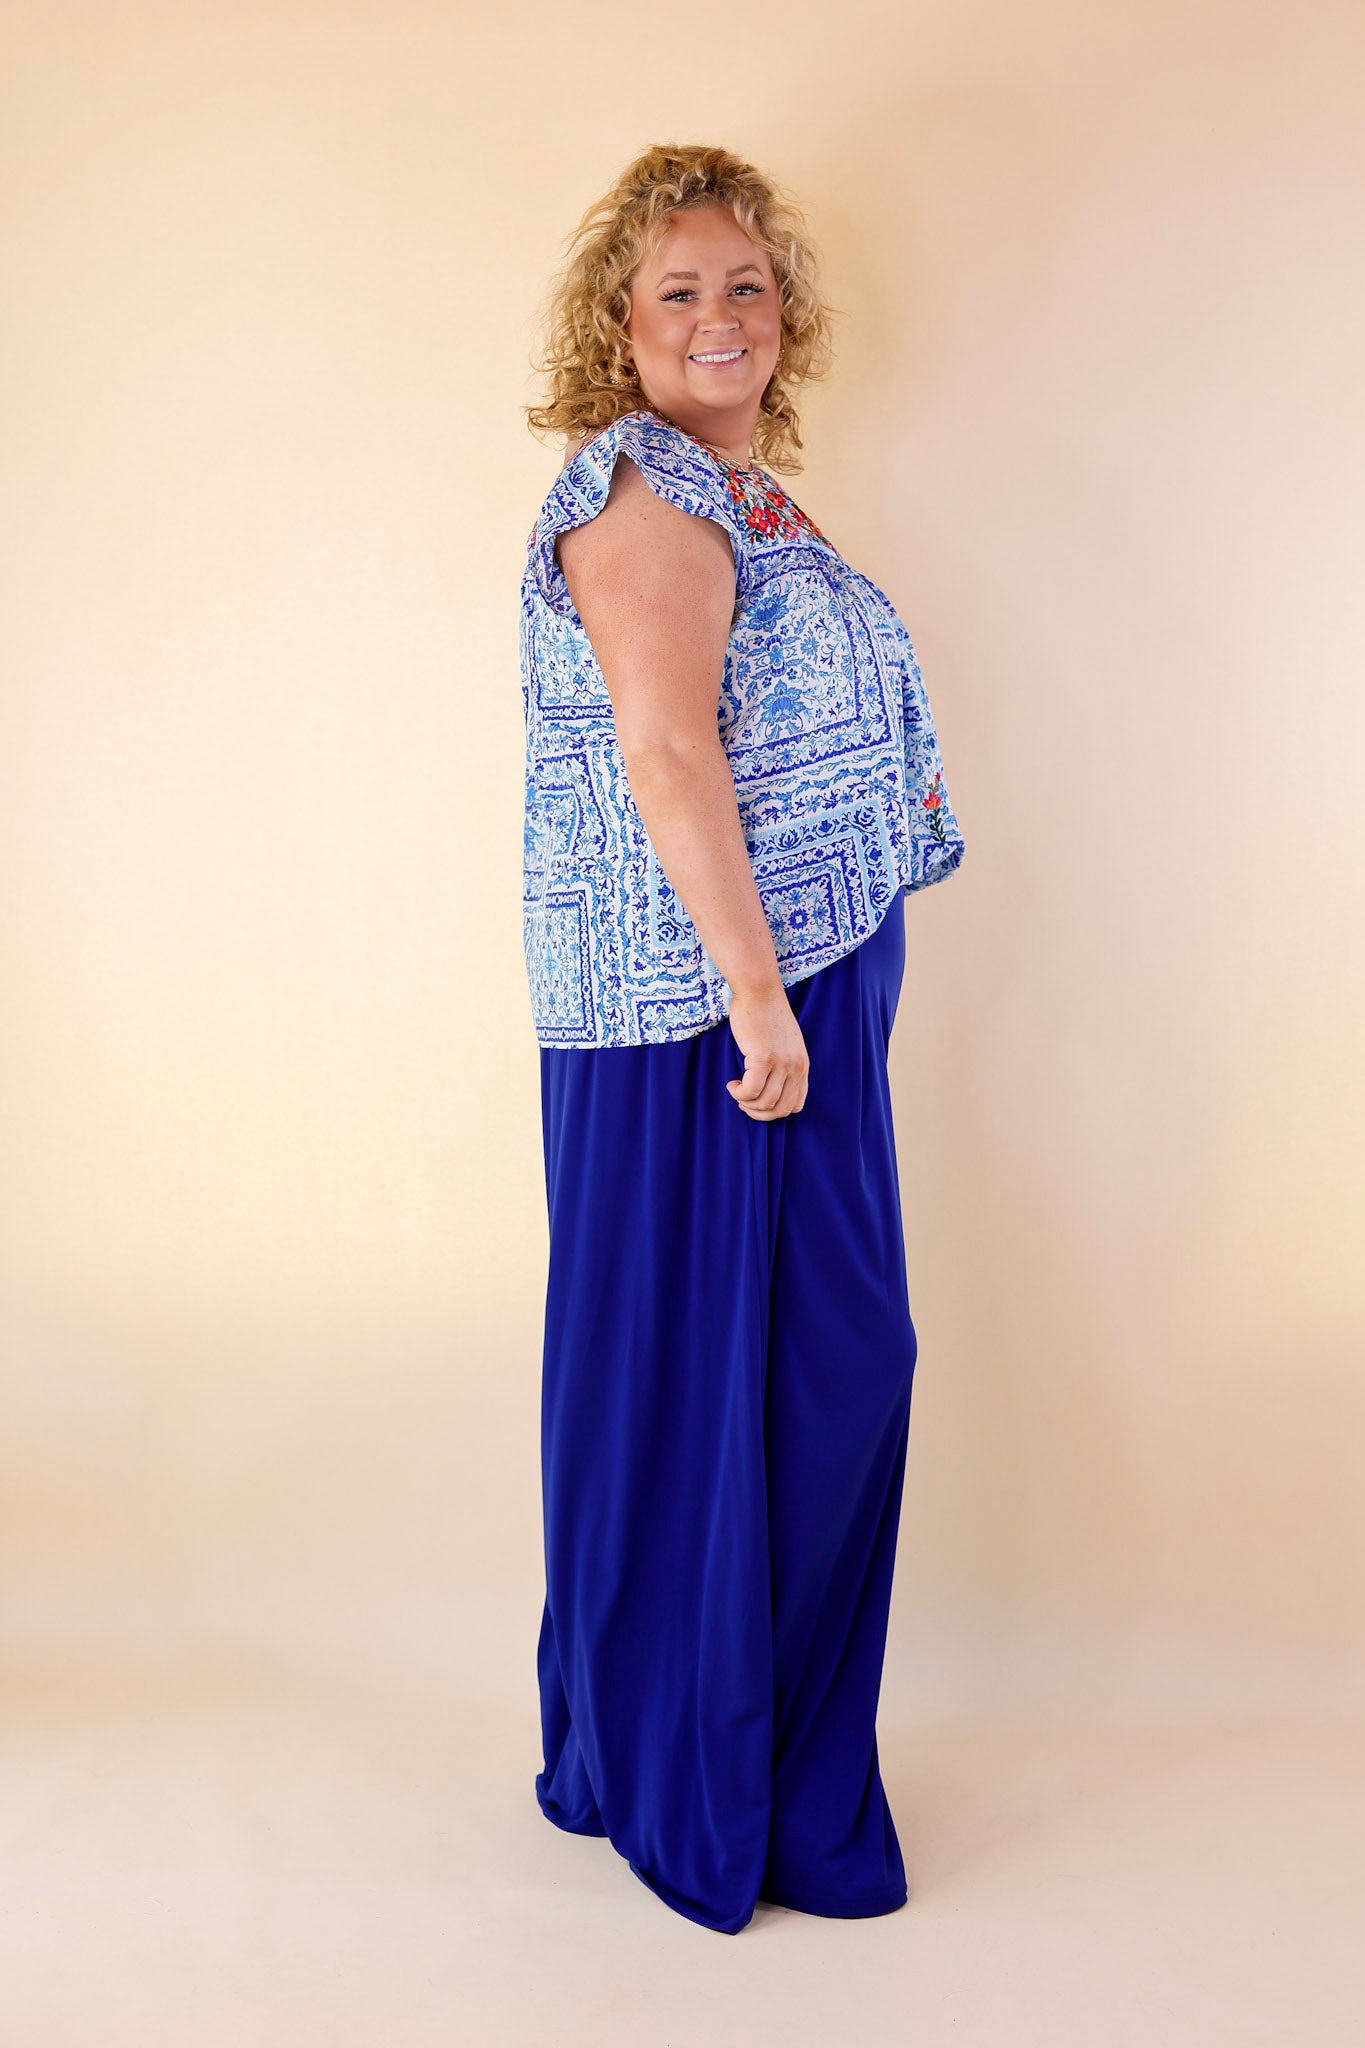 Plus Size | Urban Wonders Wide Leg Pants in Royal Blue - Giddy Up Glamour Boutique